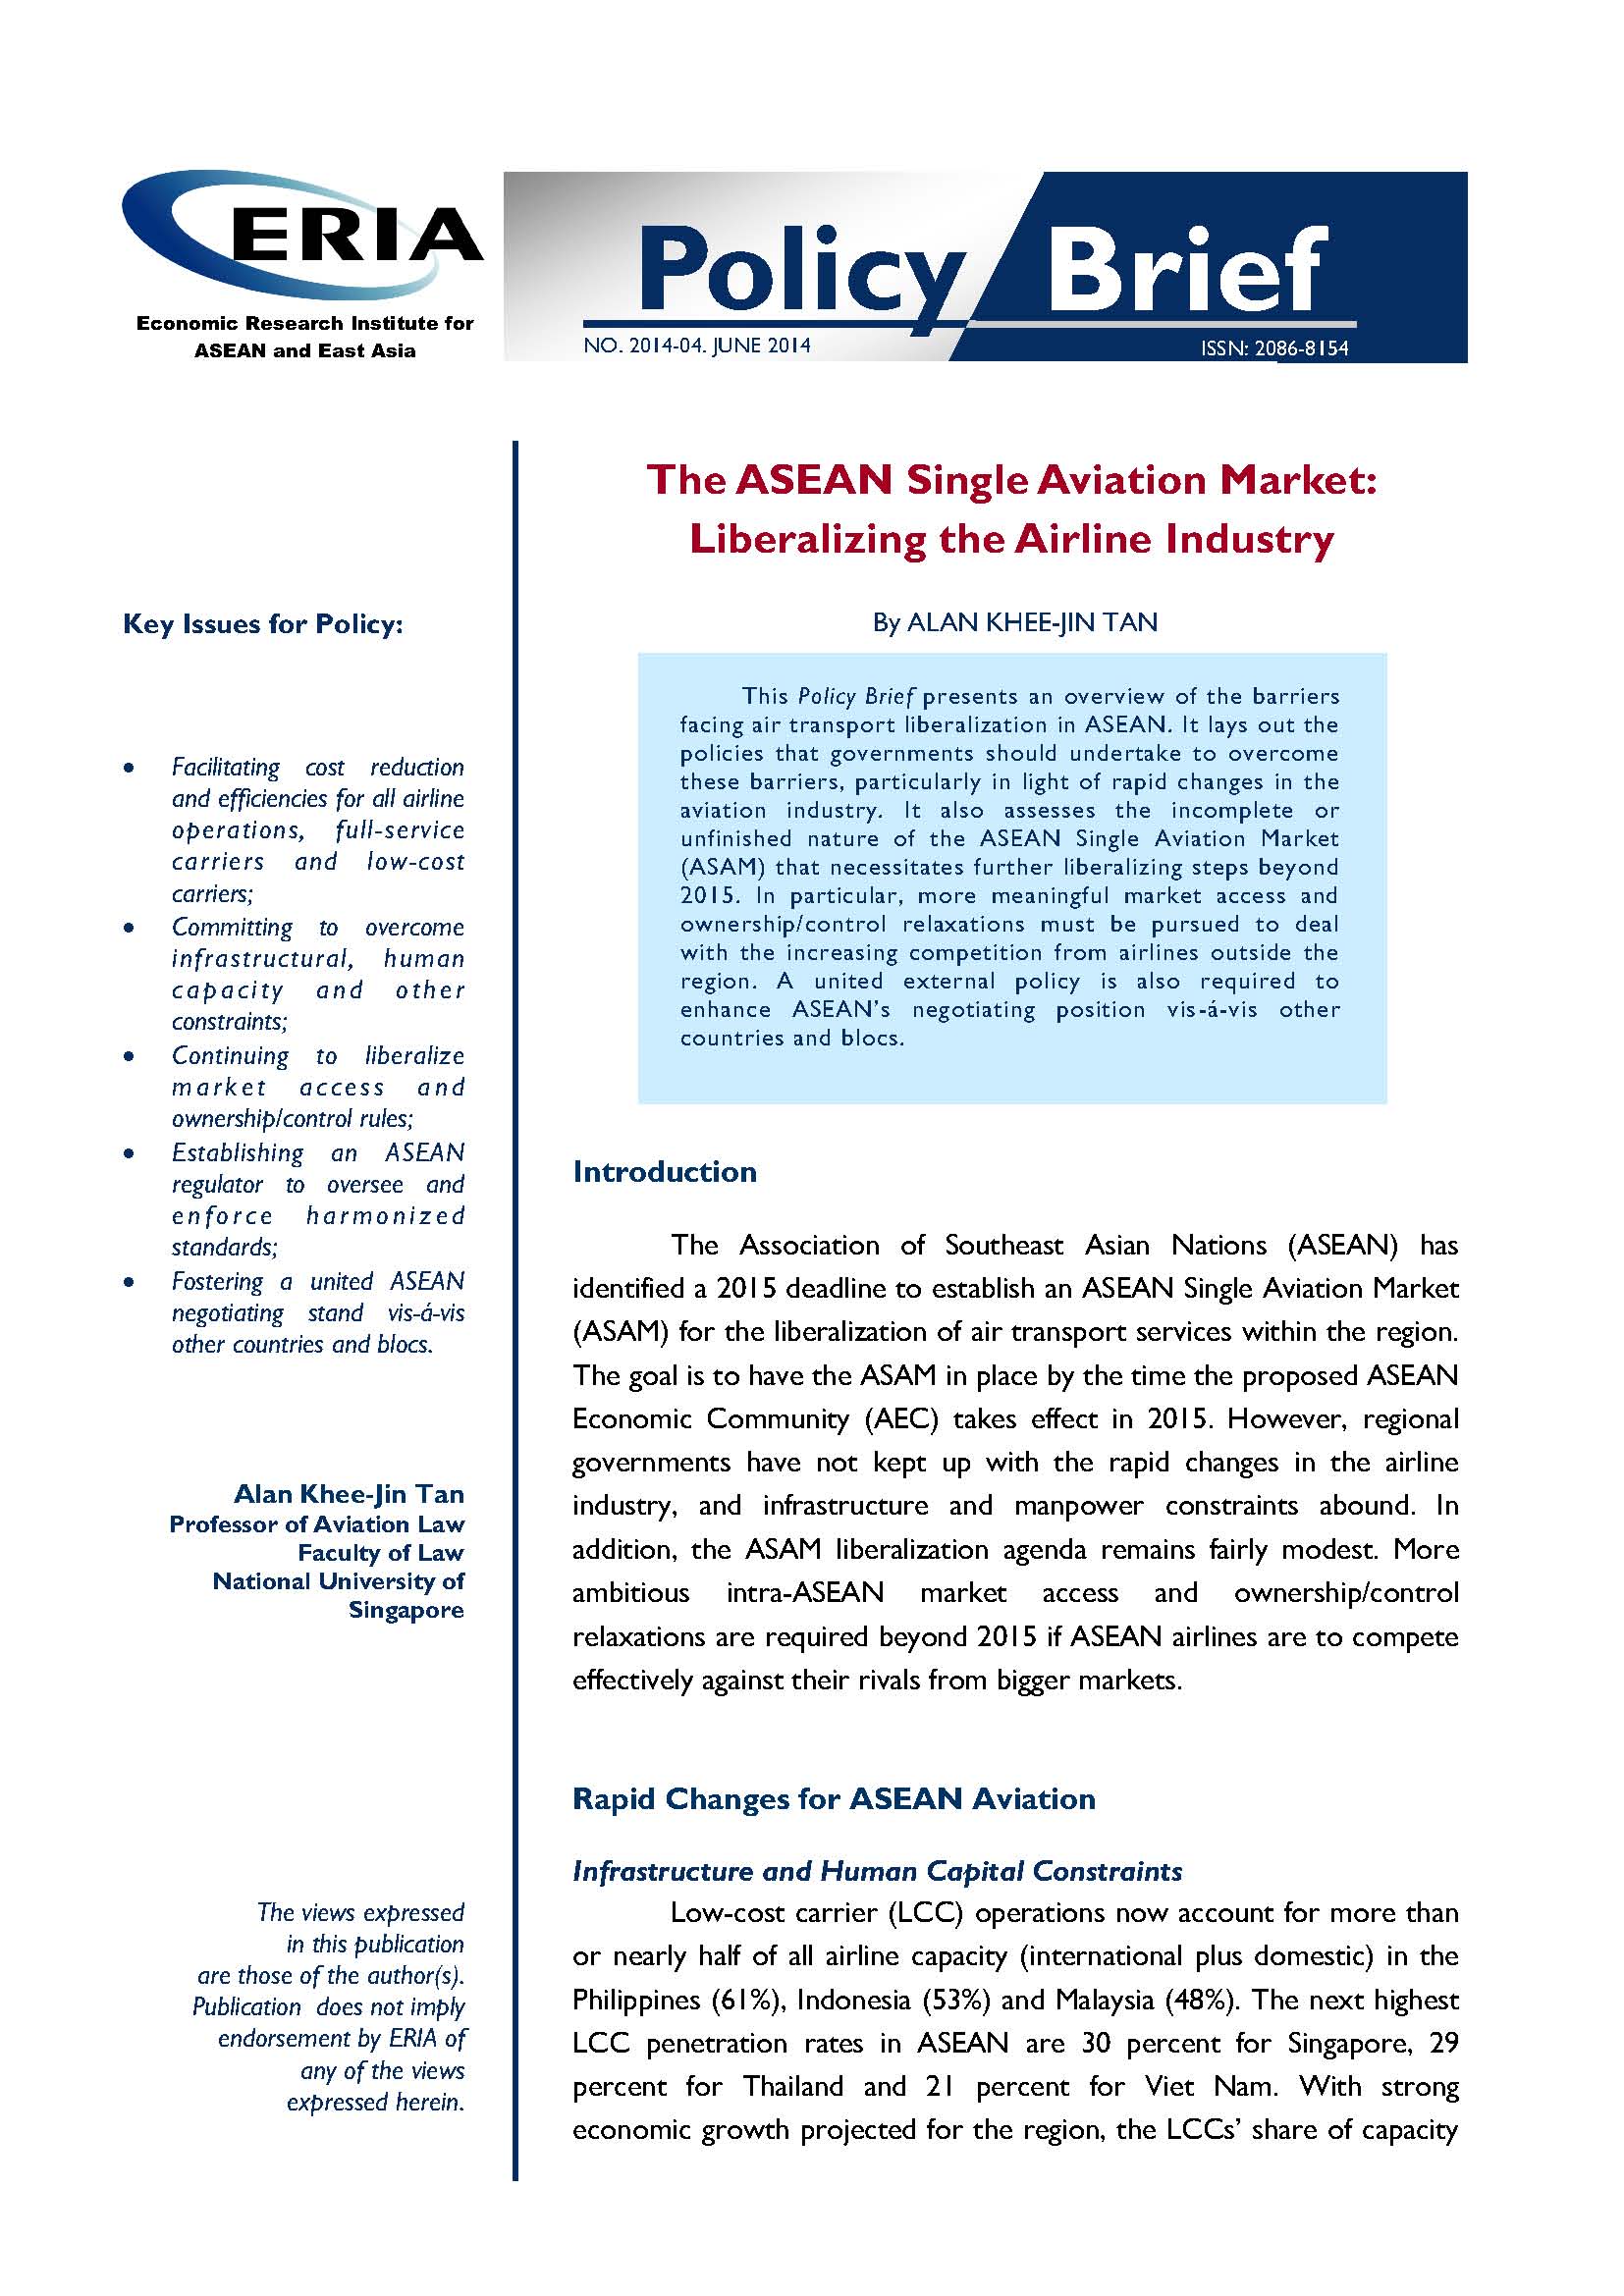 The ASEAN Single Aviation Market: Liberalizing the Airline Industry